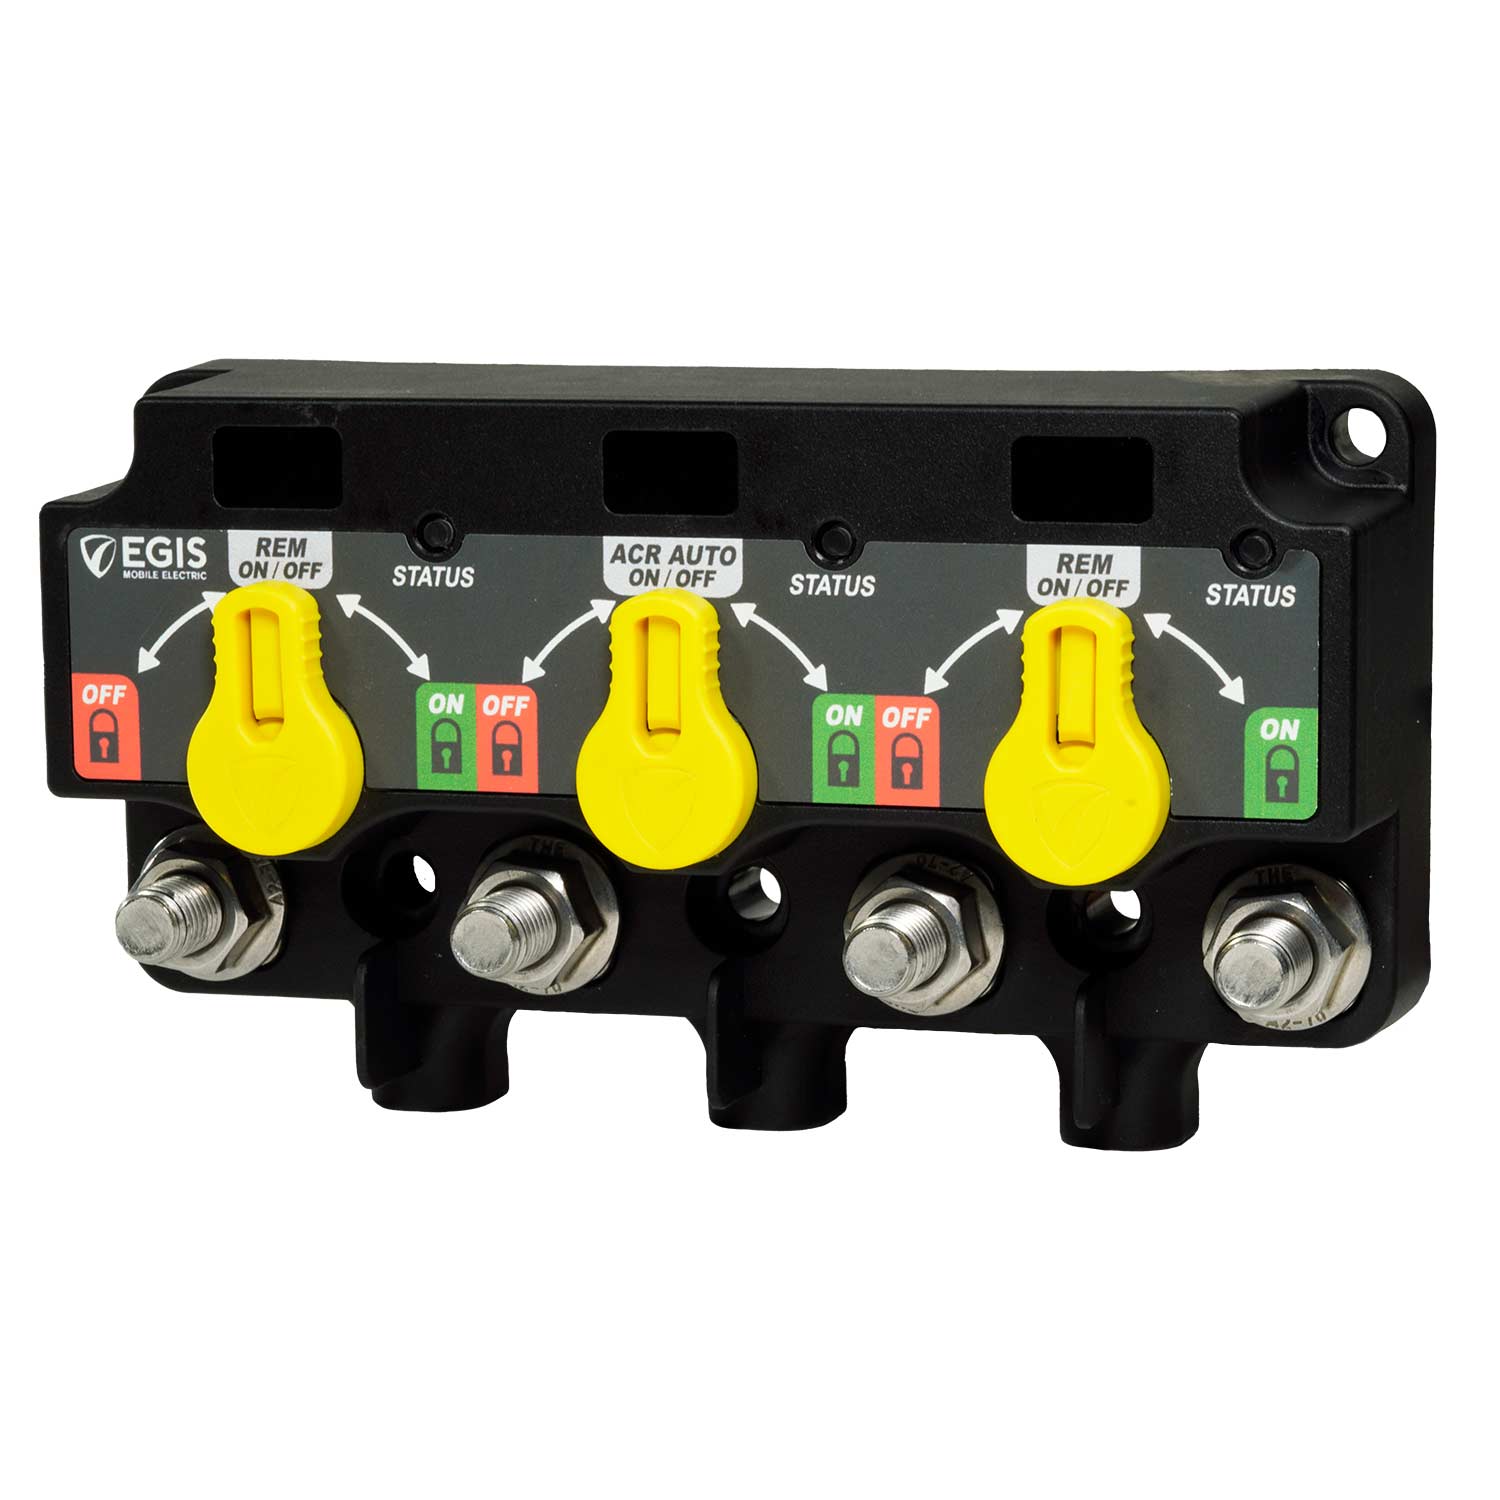 Triple XD Series, 3X Flex Relay/ACR/LVD with Knobs, DTM Connector